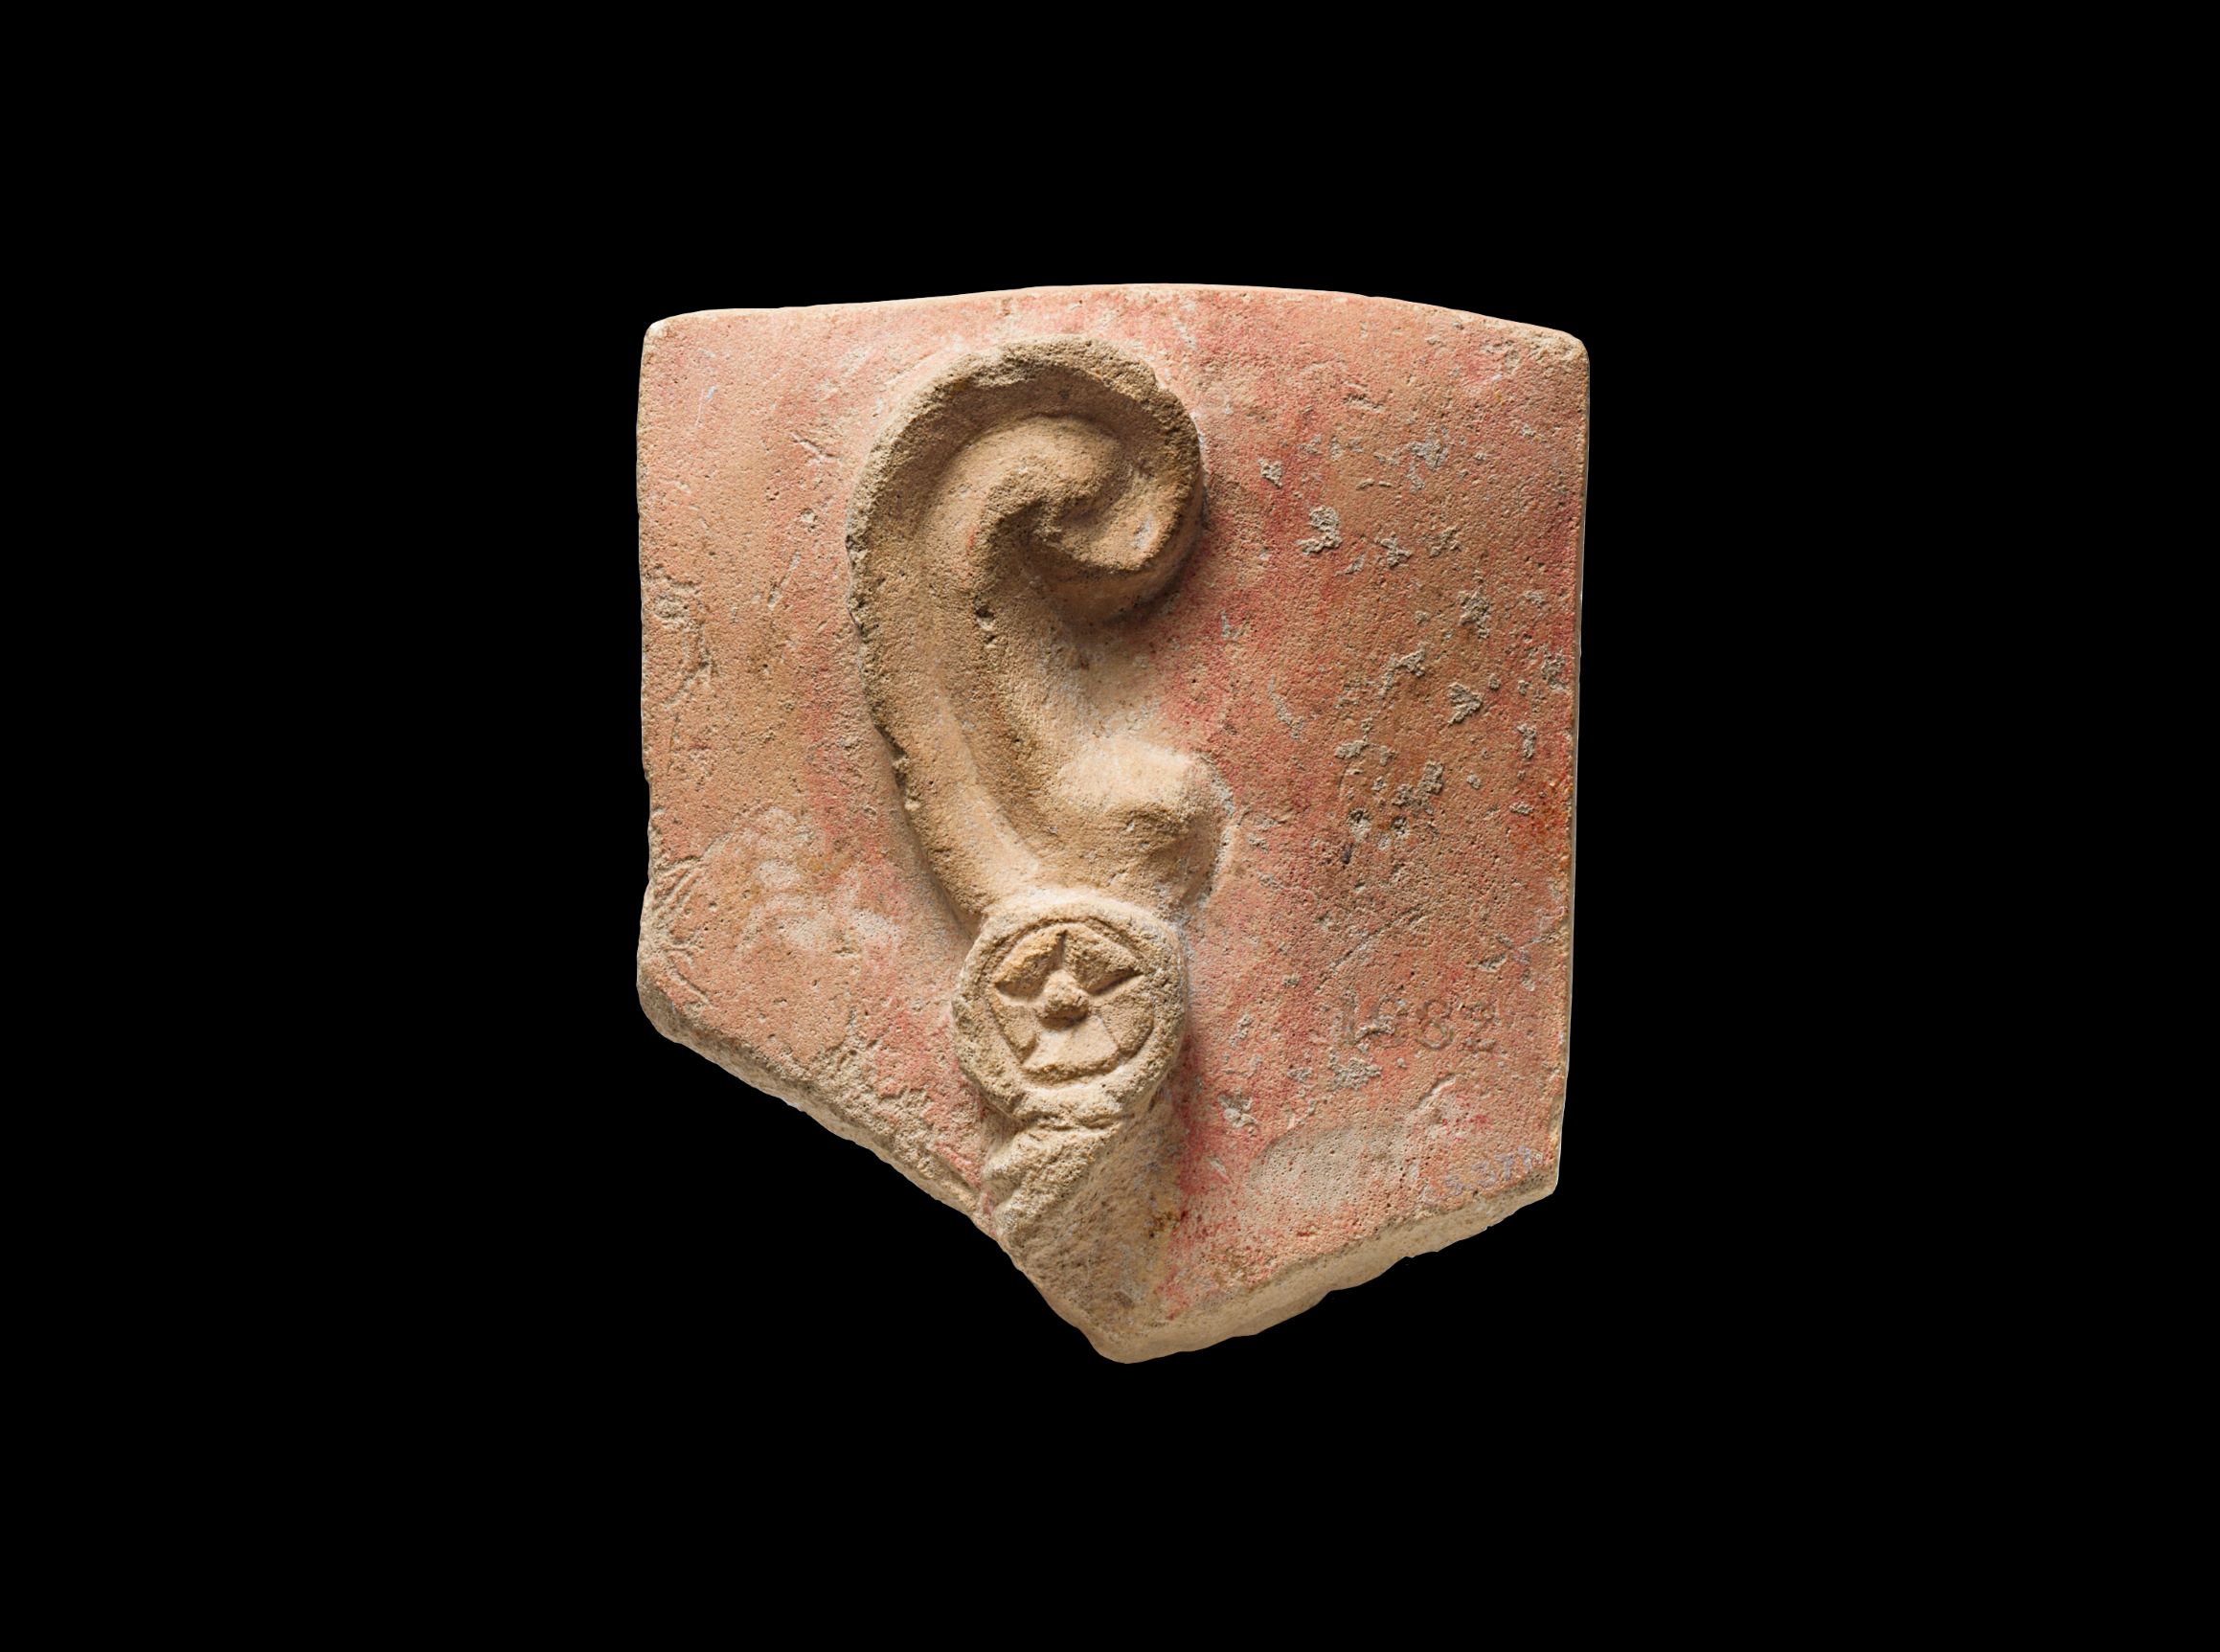 Stone votive of an ear with earring, 4th–3rd century BC